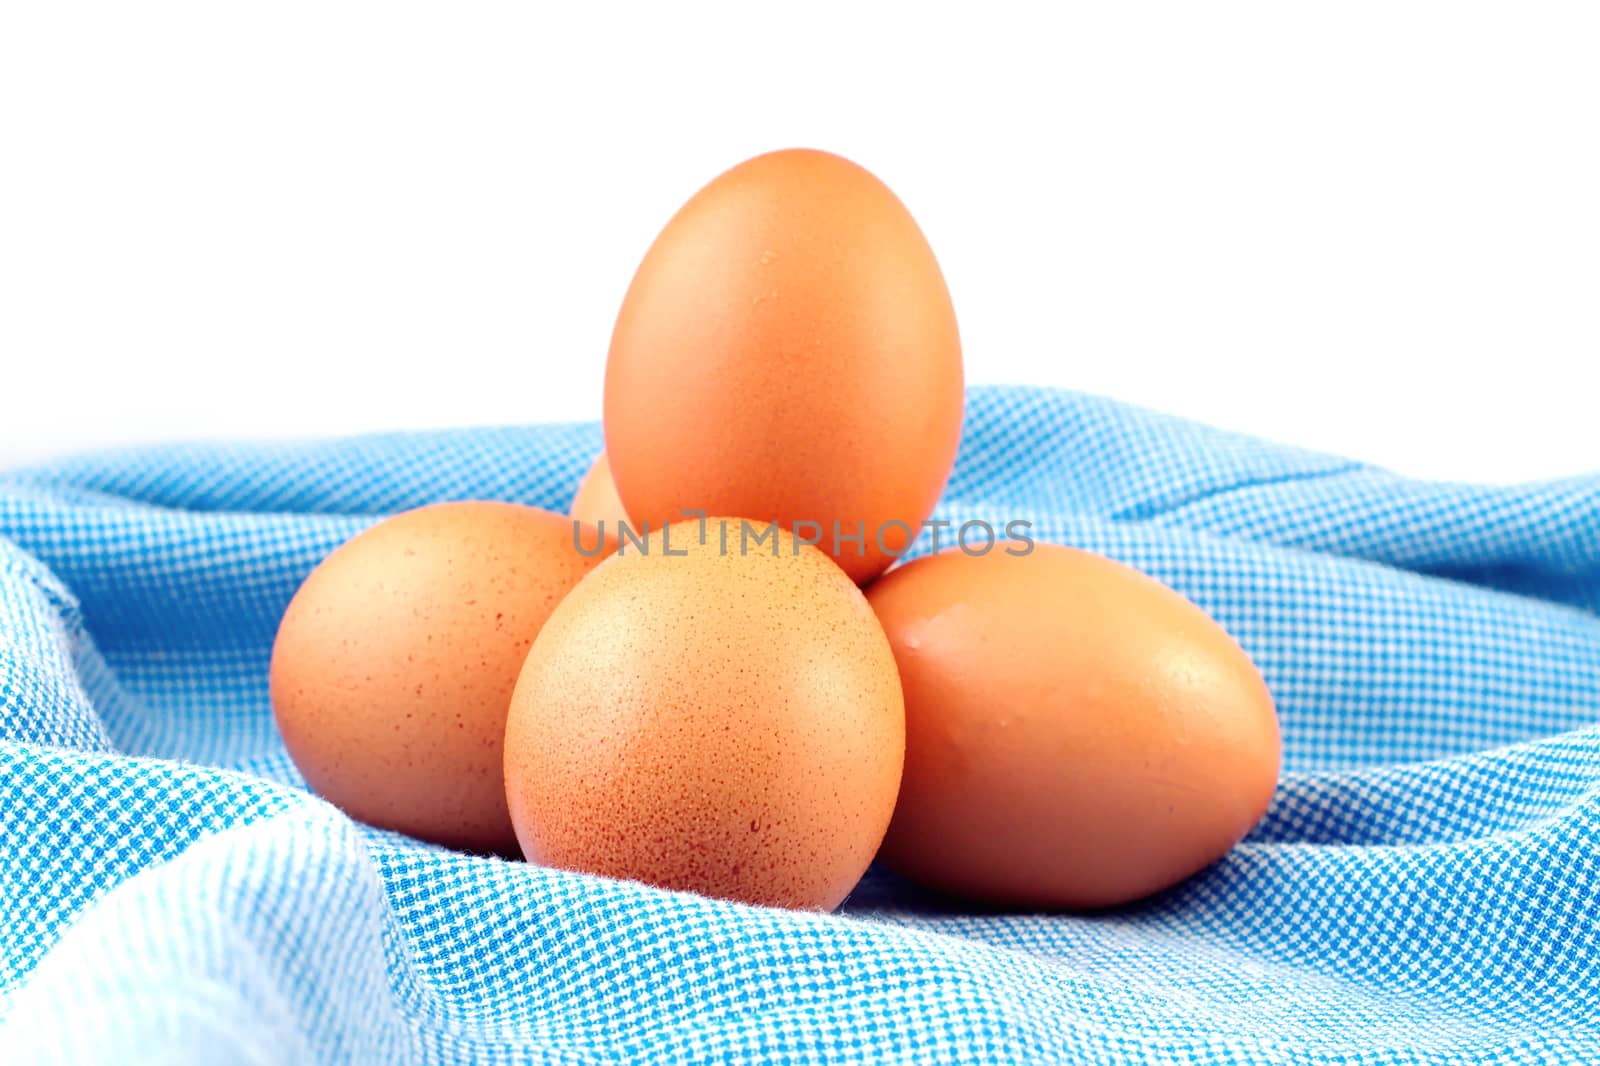 Eggs on blue cloth, select focus on front egg